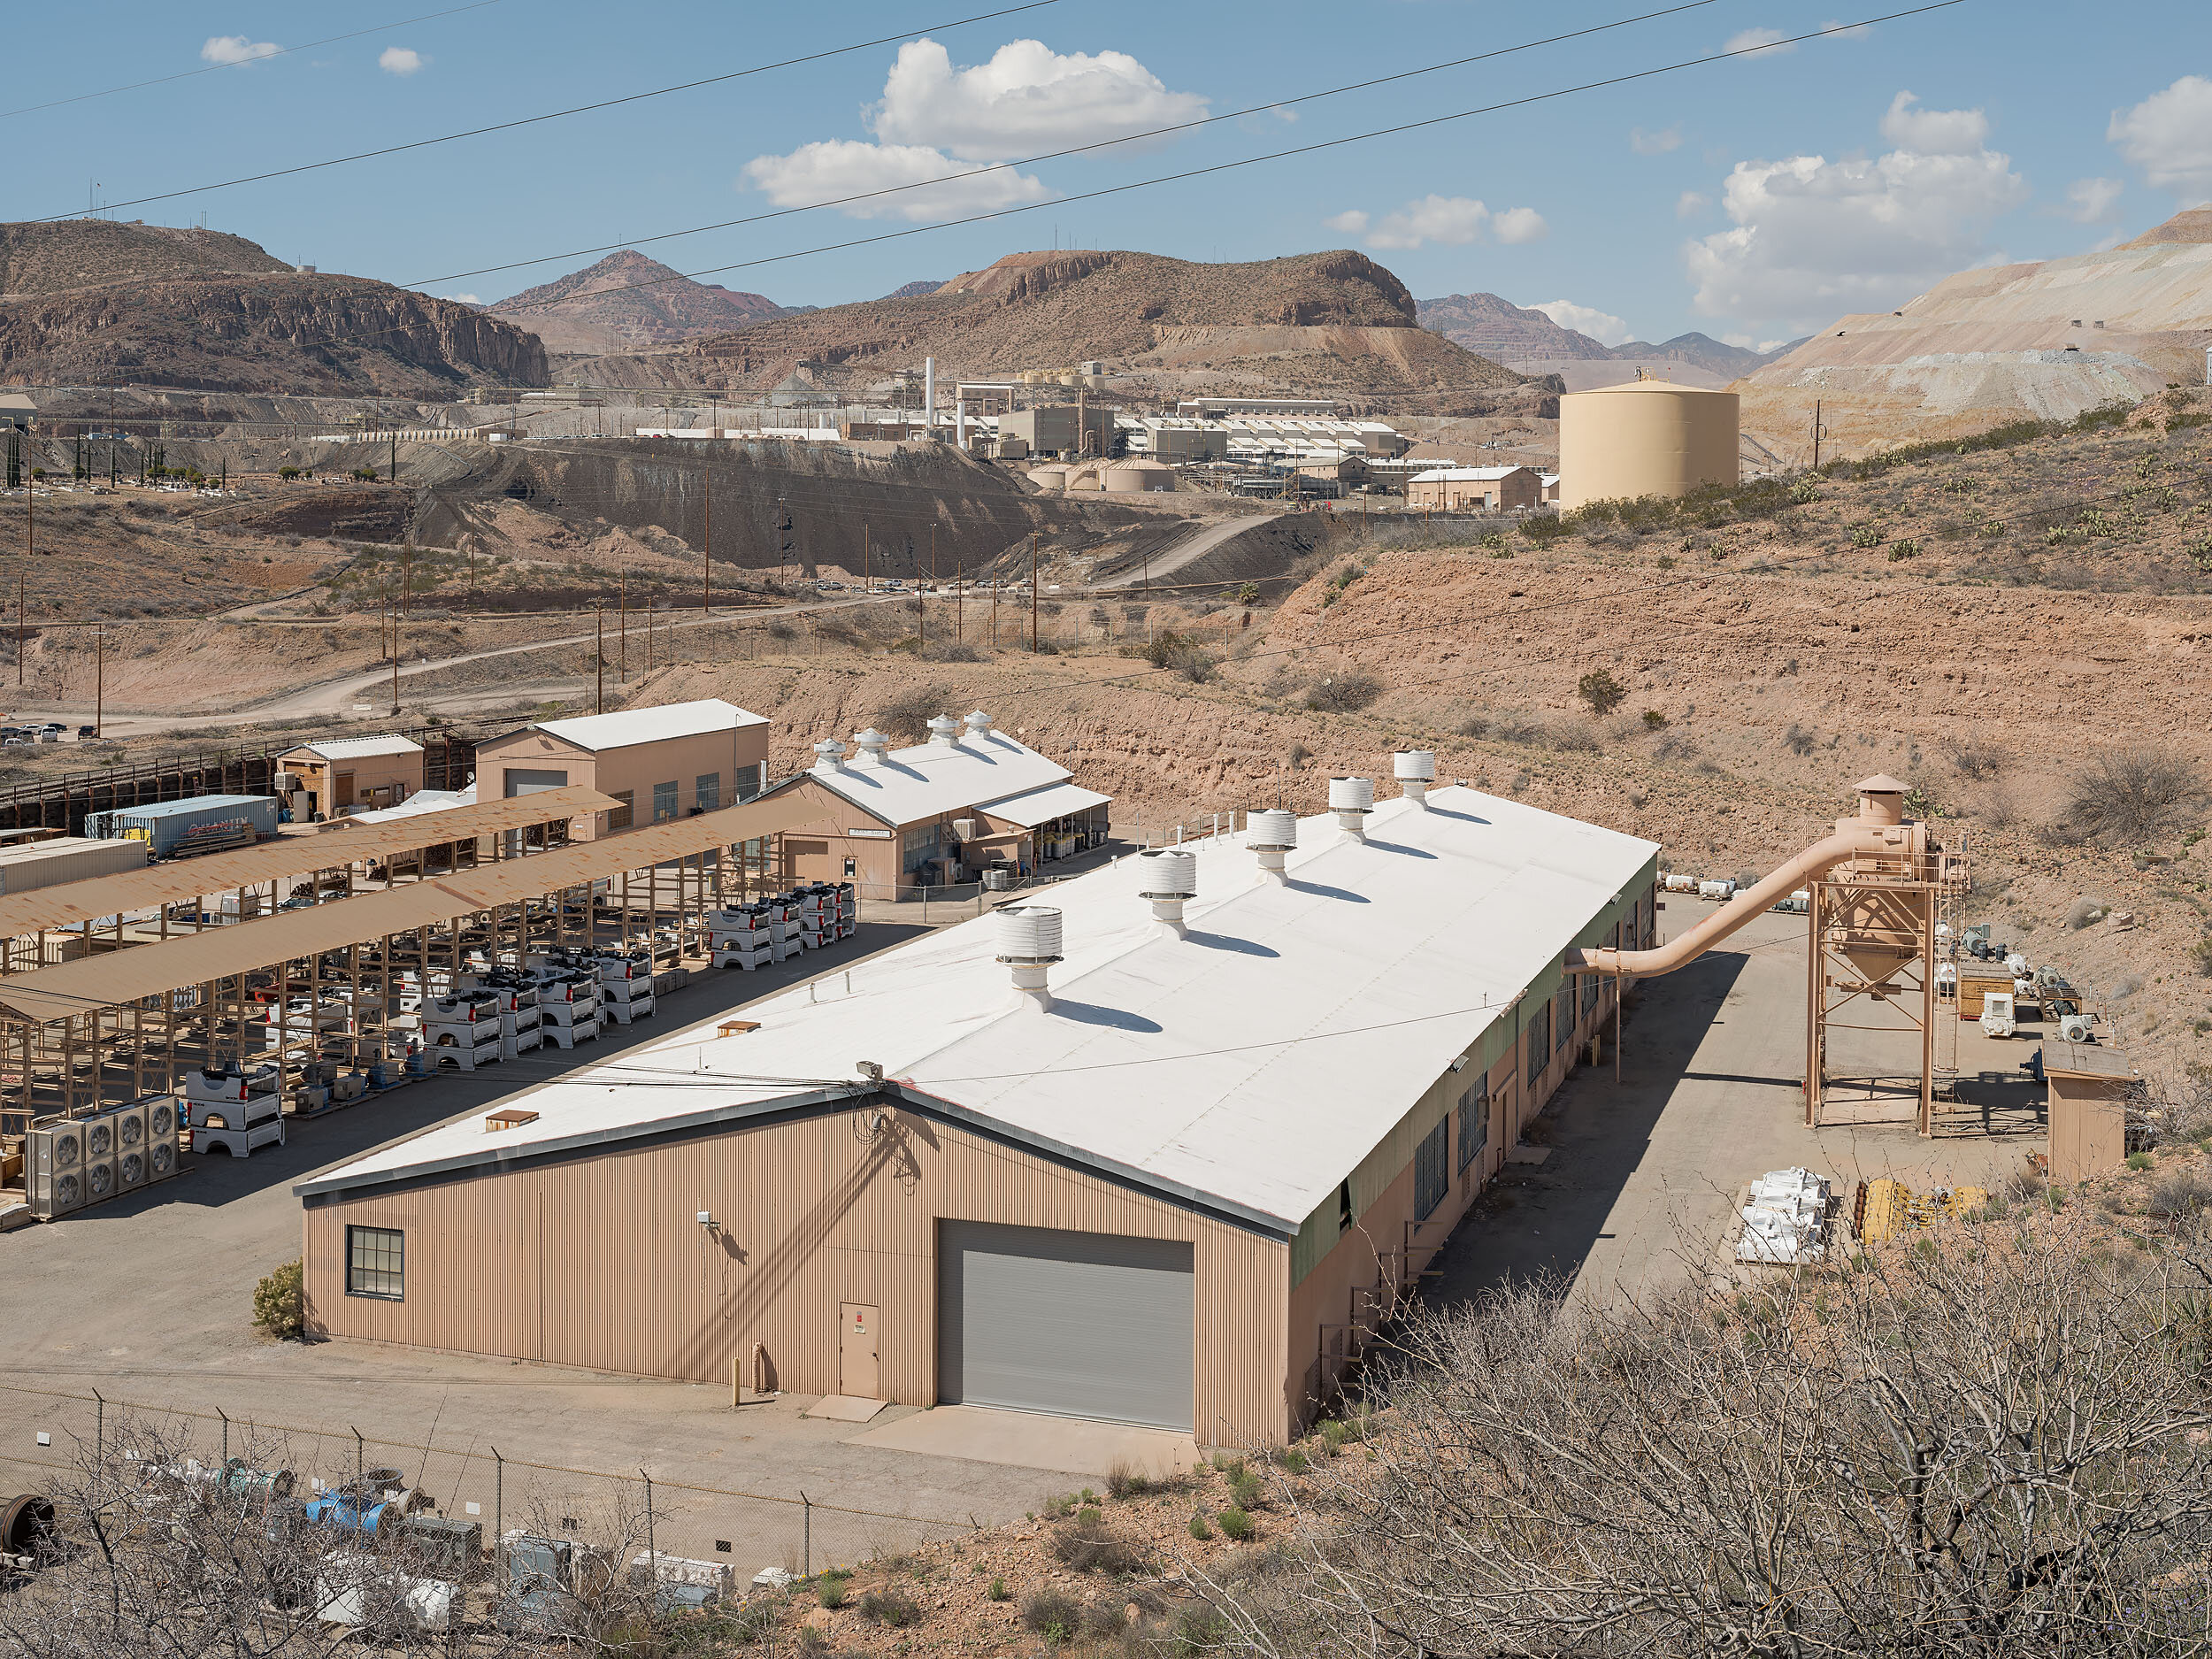 Copper concentrating plant of the Freeport-McMoRan mining cooperation.